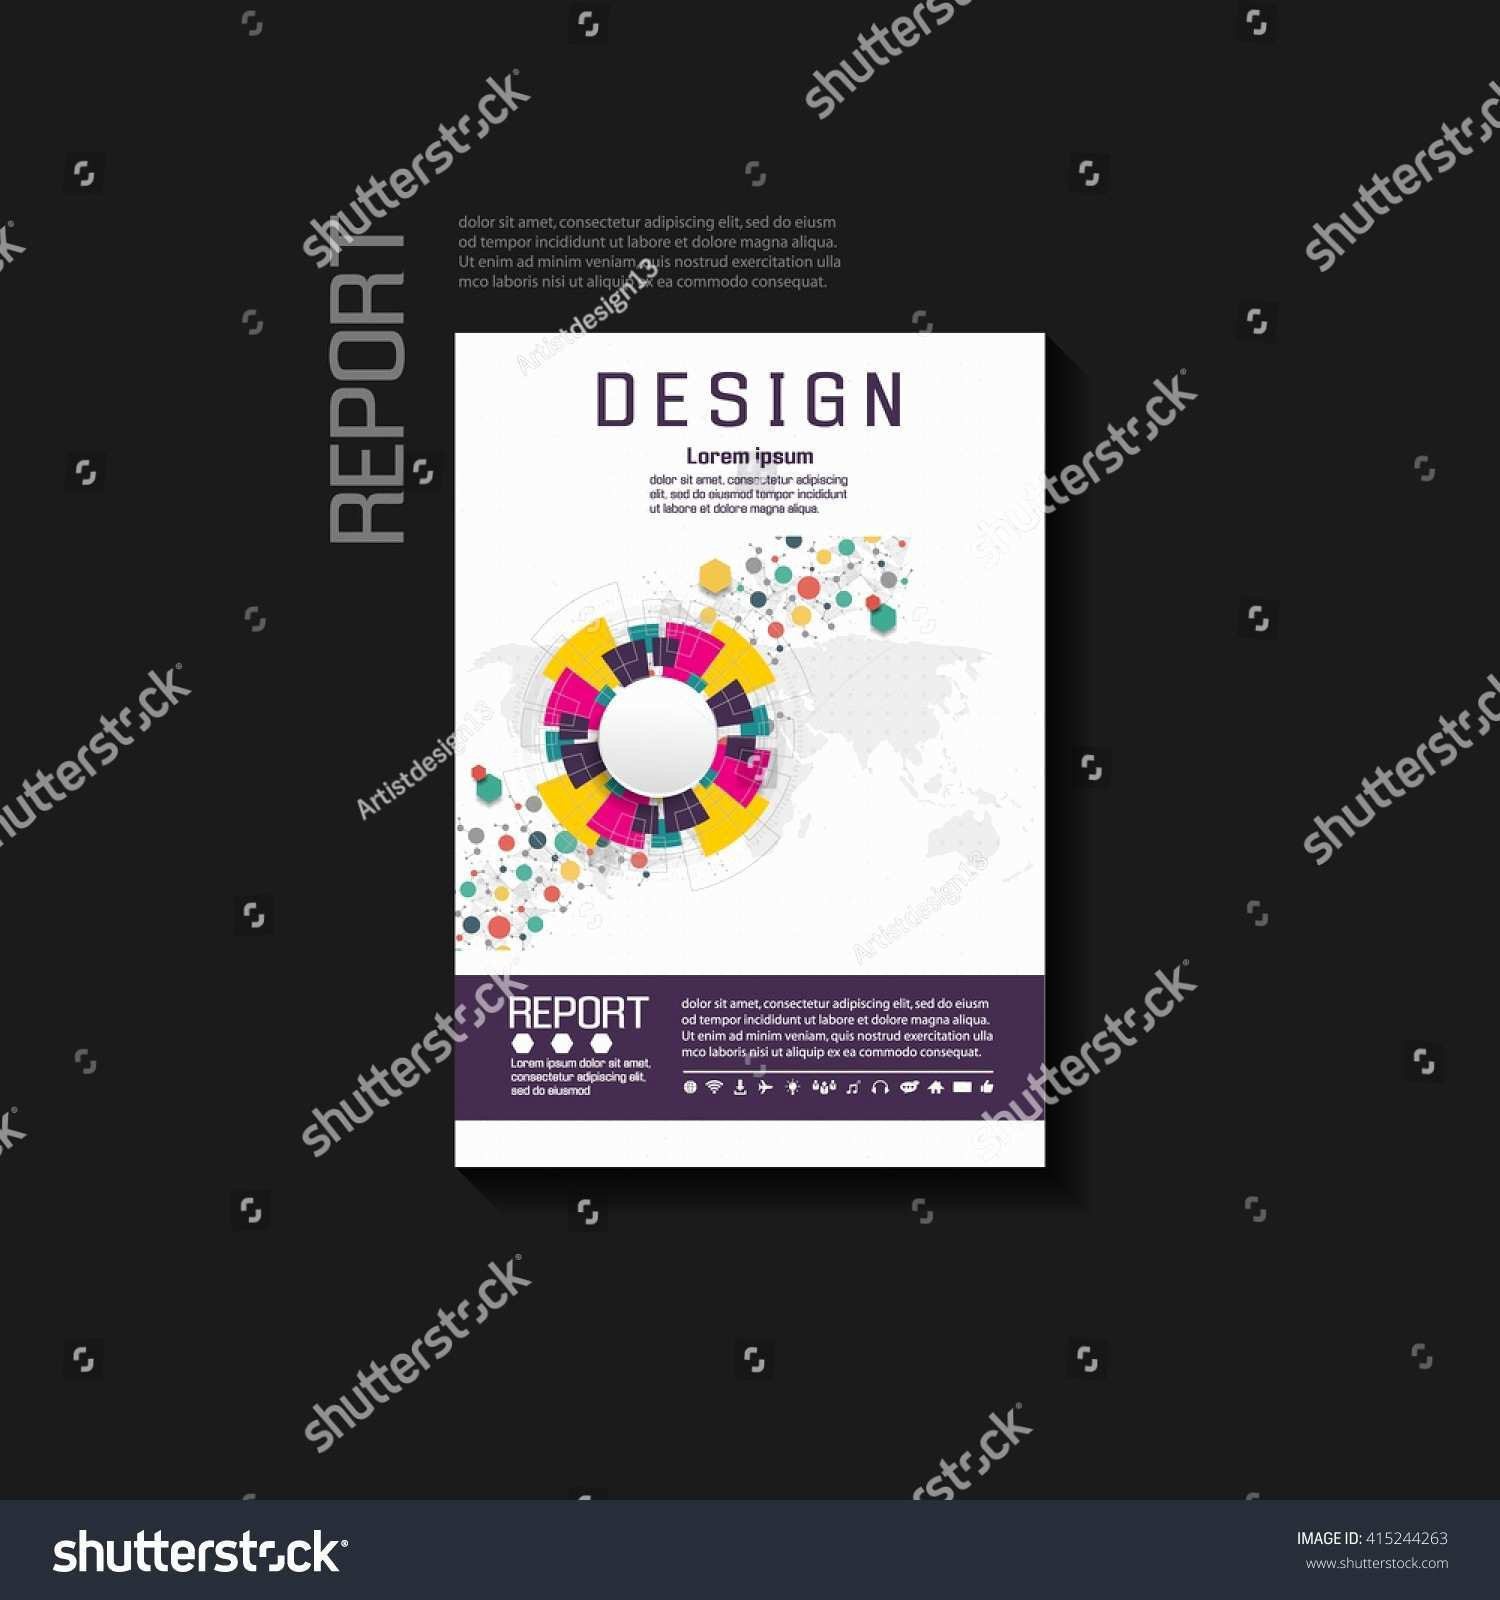 free photoshop business card template picture business card psd template elegant free business card psd templates of free photoshop business card template